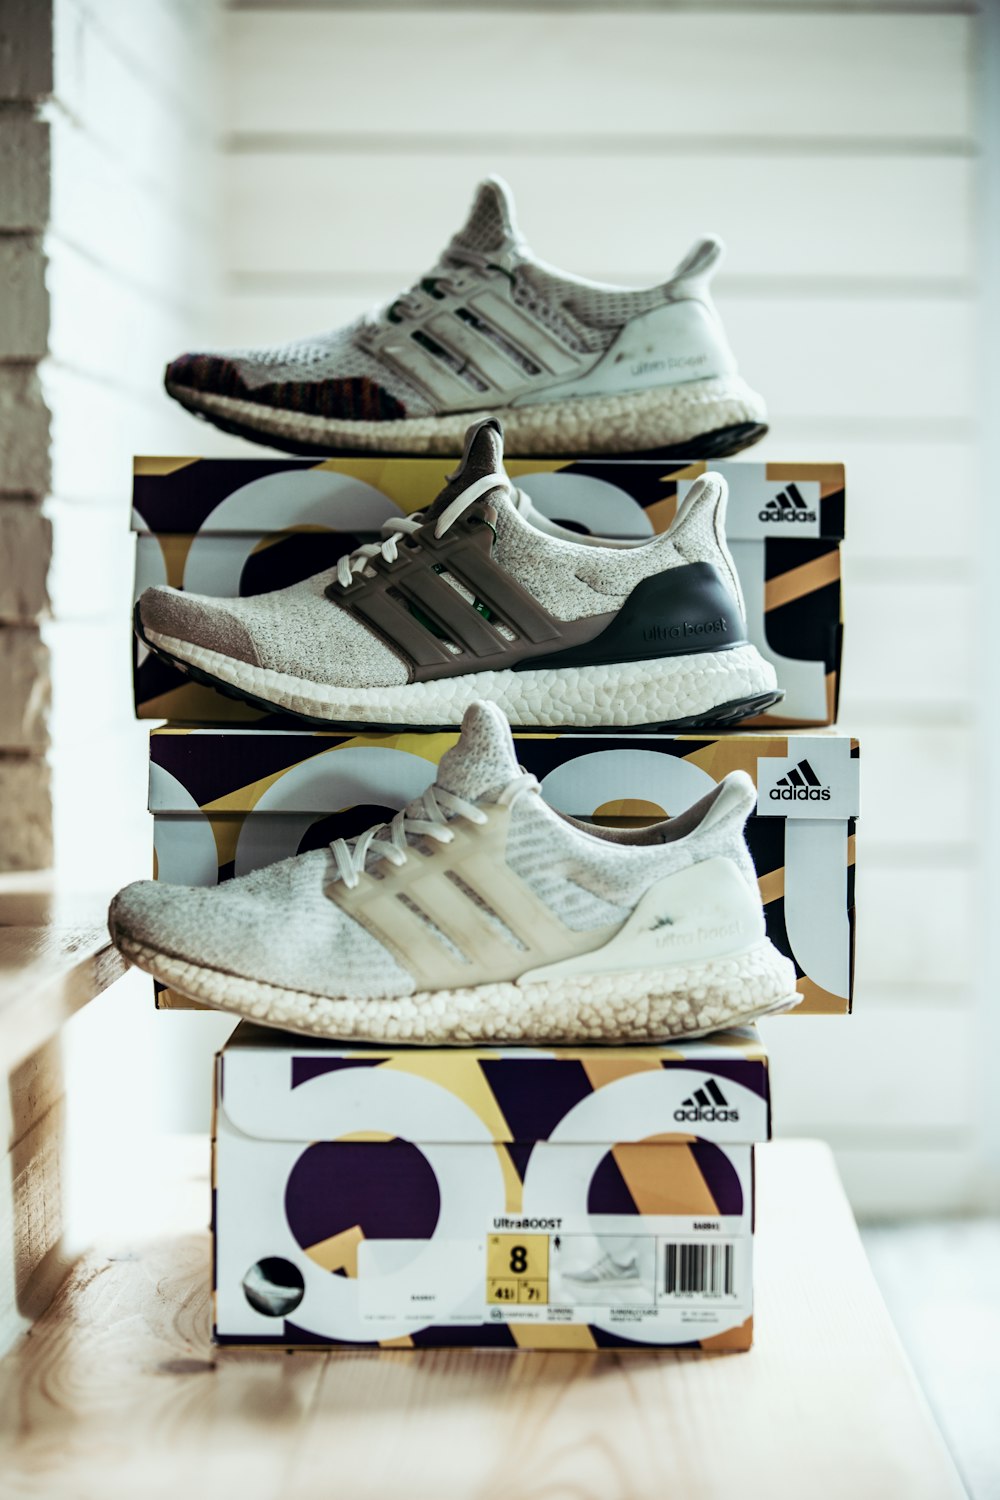 three unpaired gray adidas running shoes with boxes